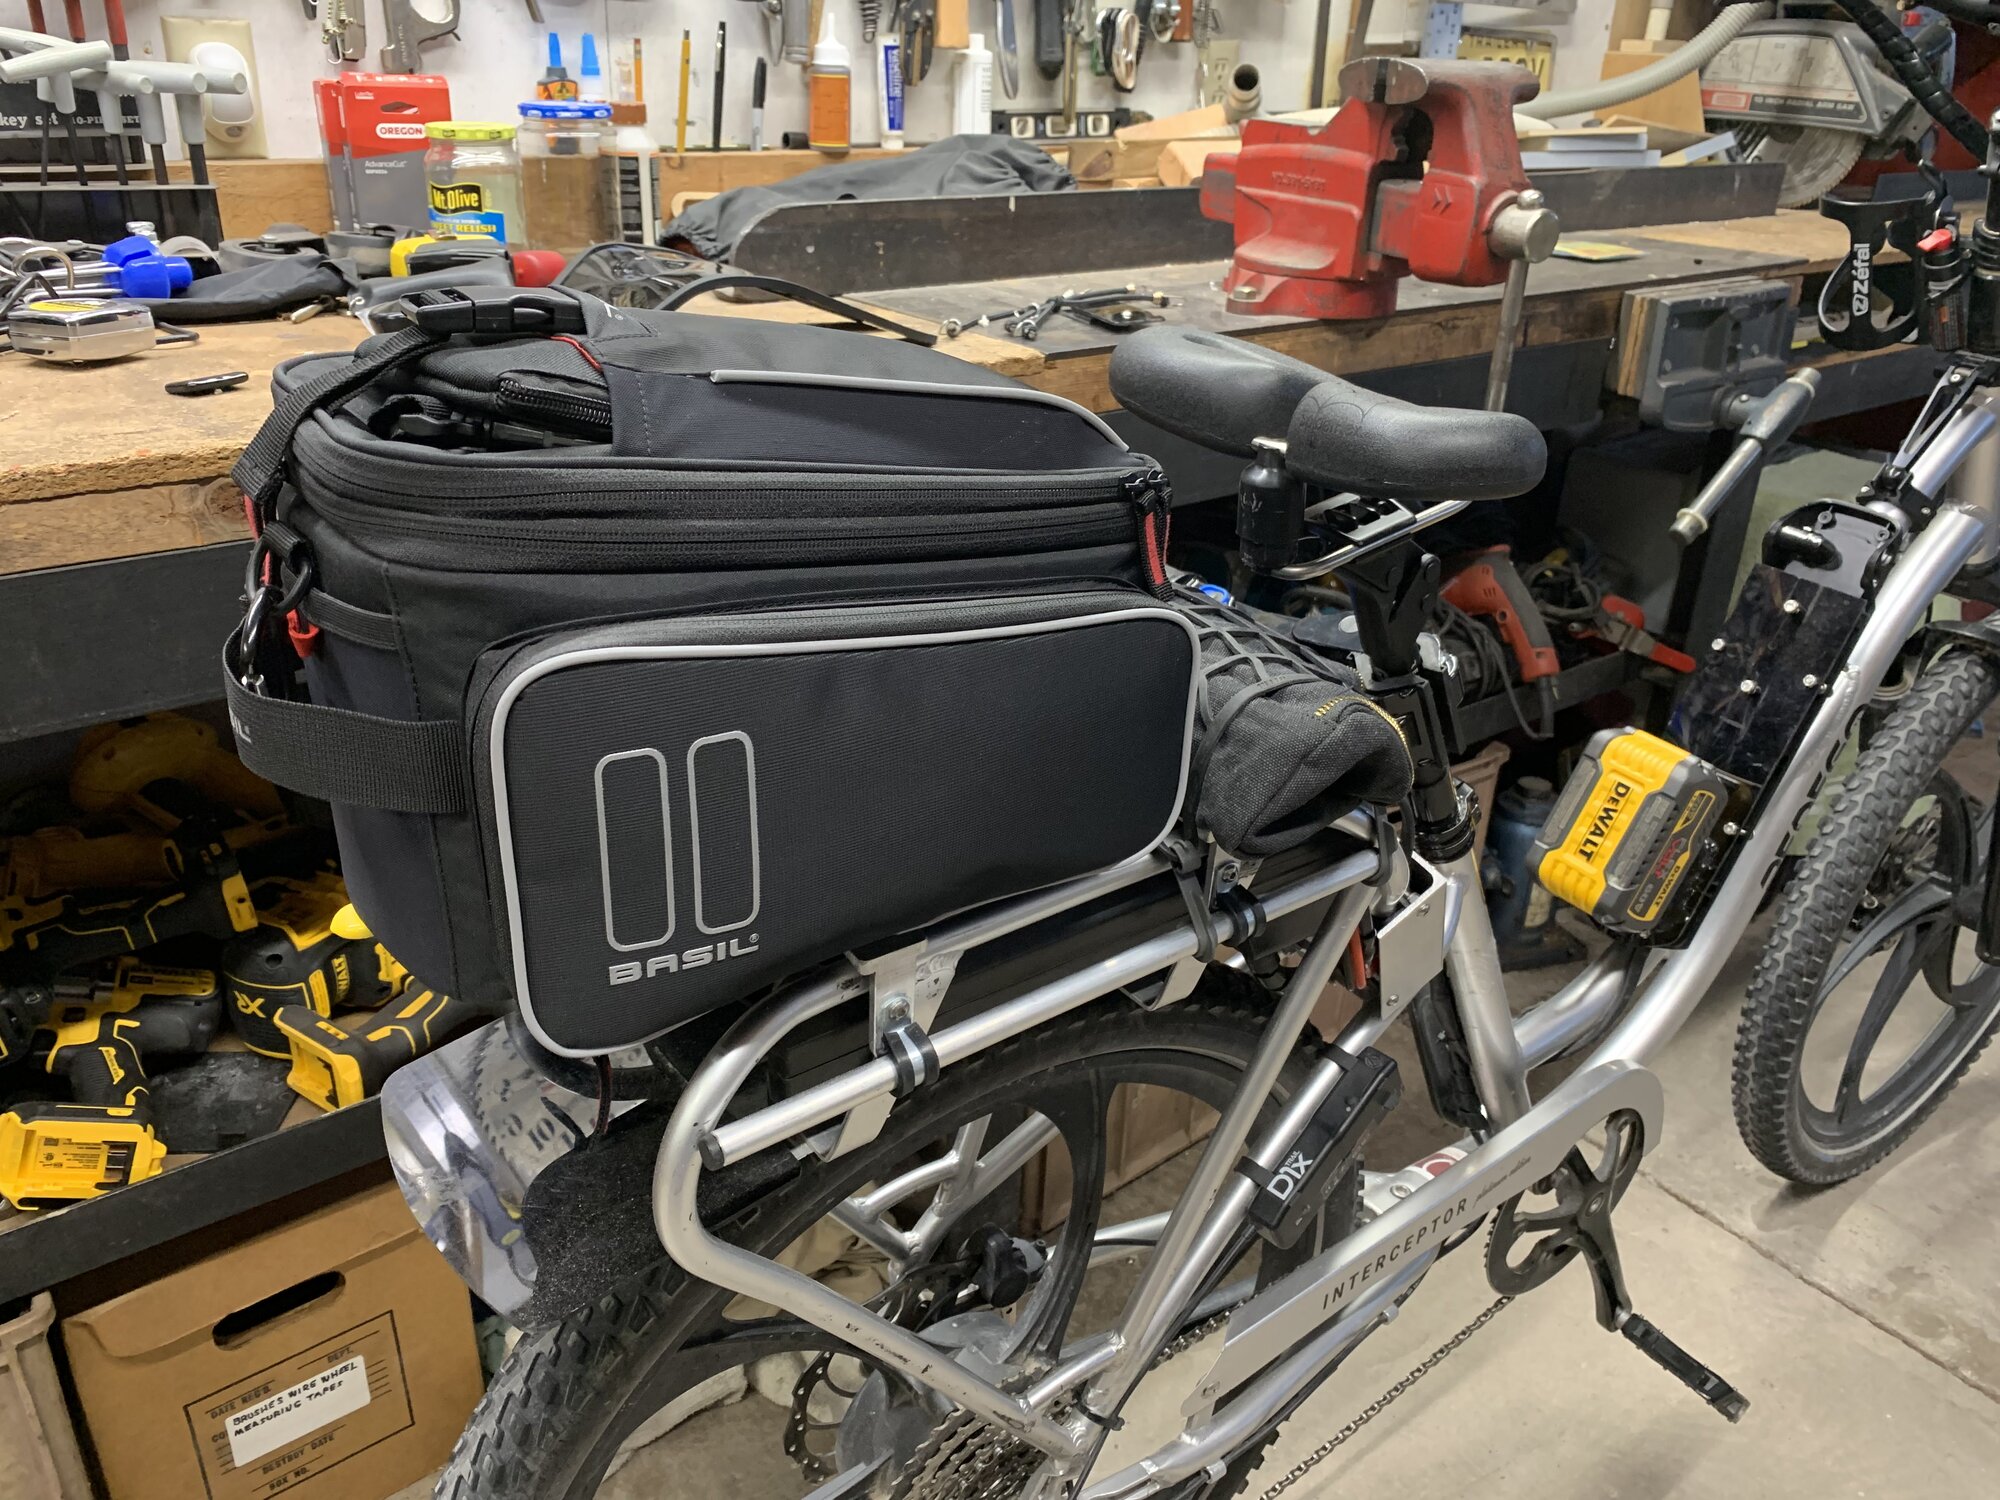 8 Best Bike Trunk Bags for Rear-Rack Top: Reviewed for 2022!